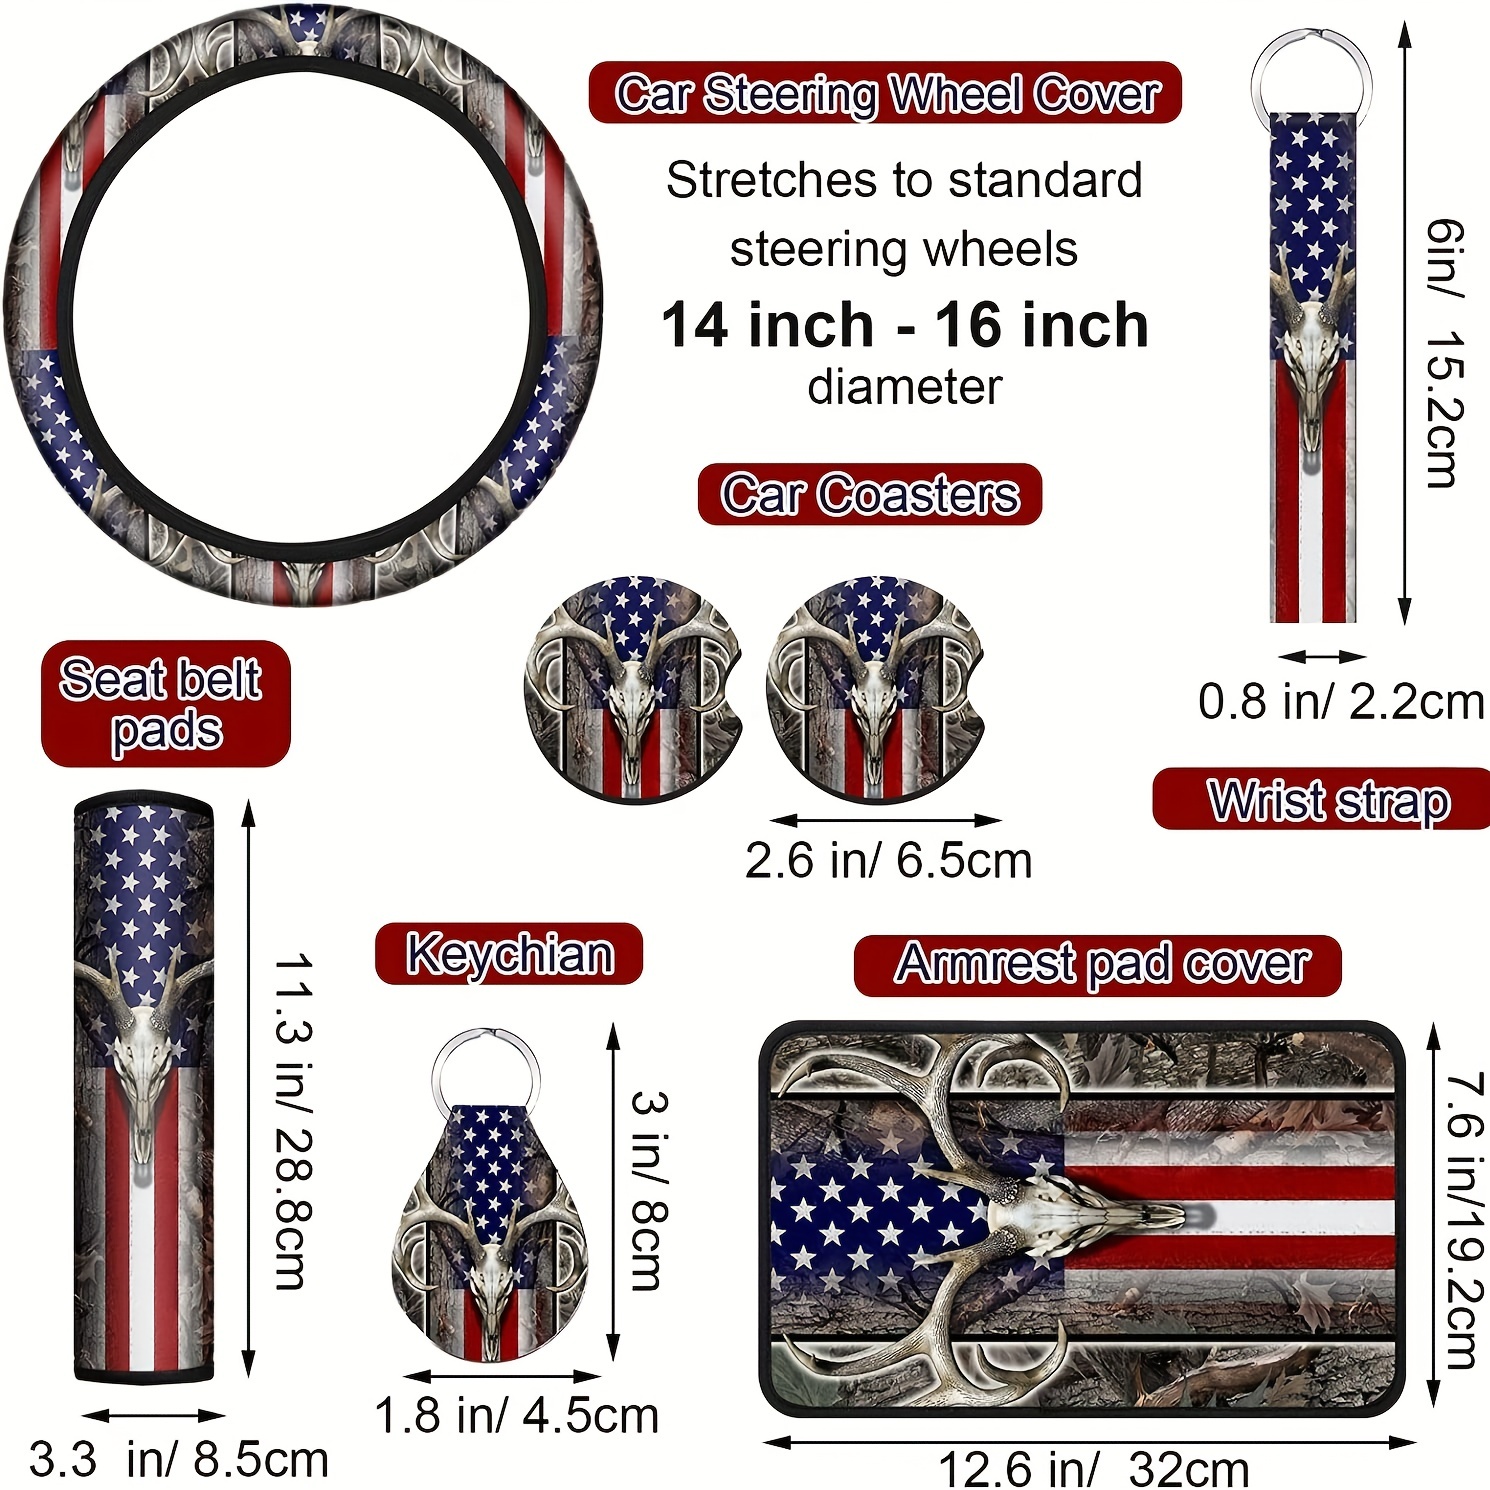 Show Your Patriotism with this 10pcs American Flag Wood Deer Skull Camo Car  Accessories Set!